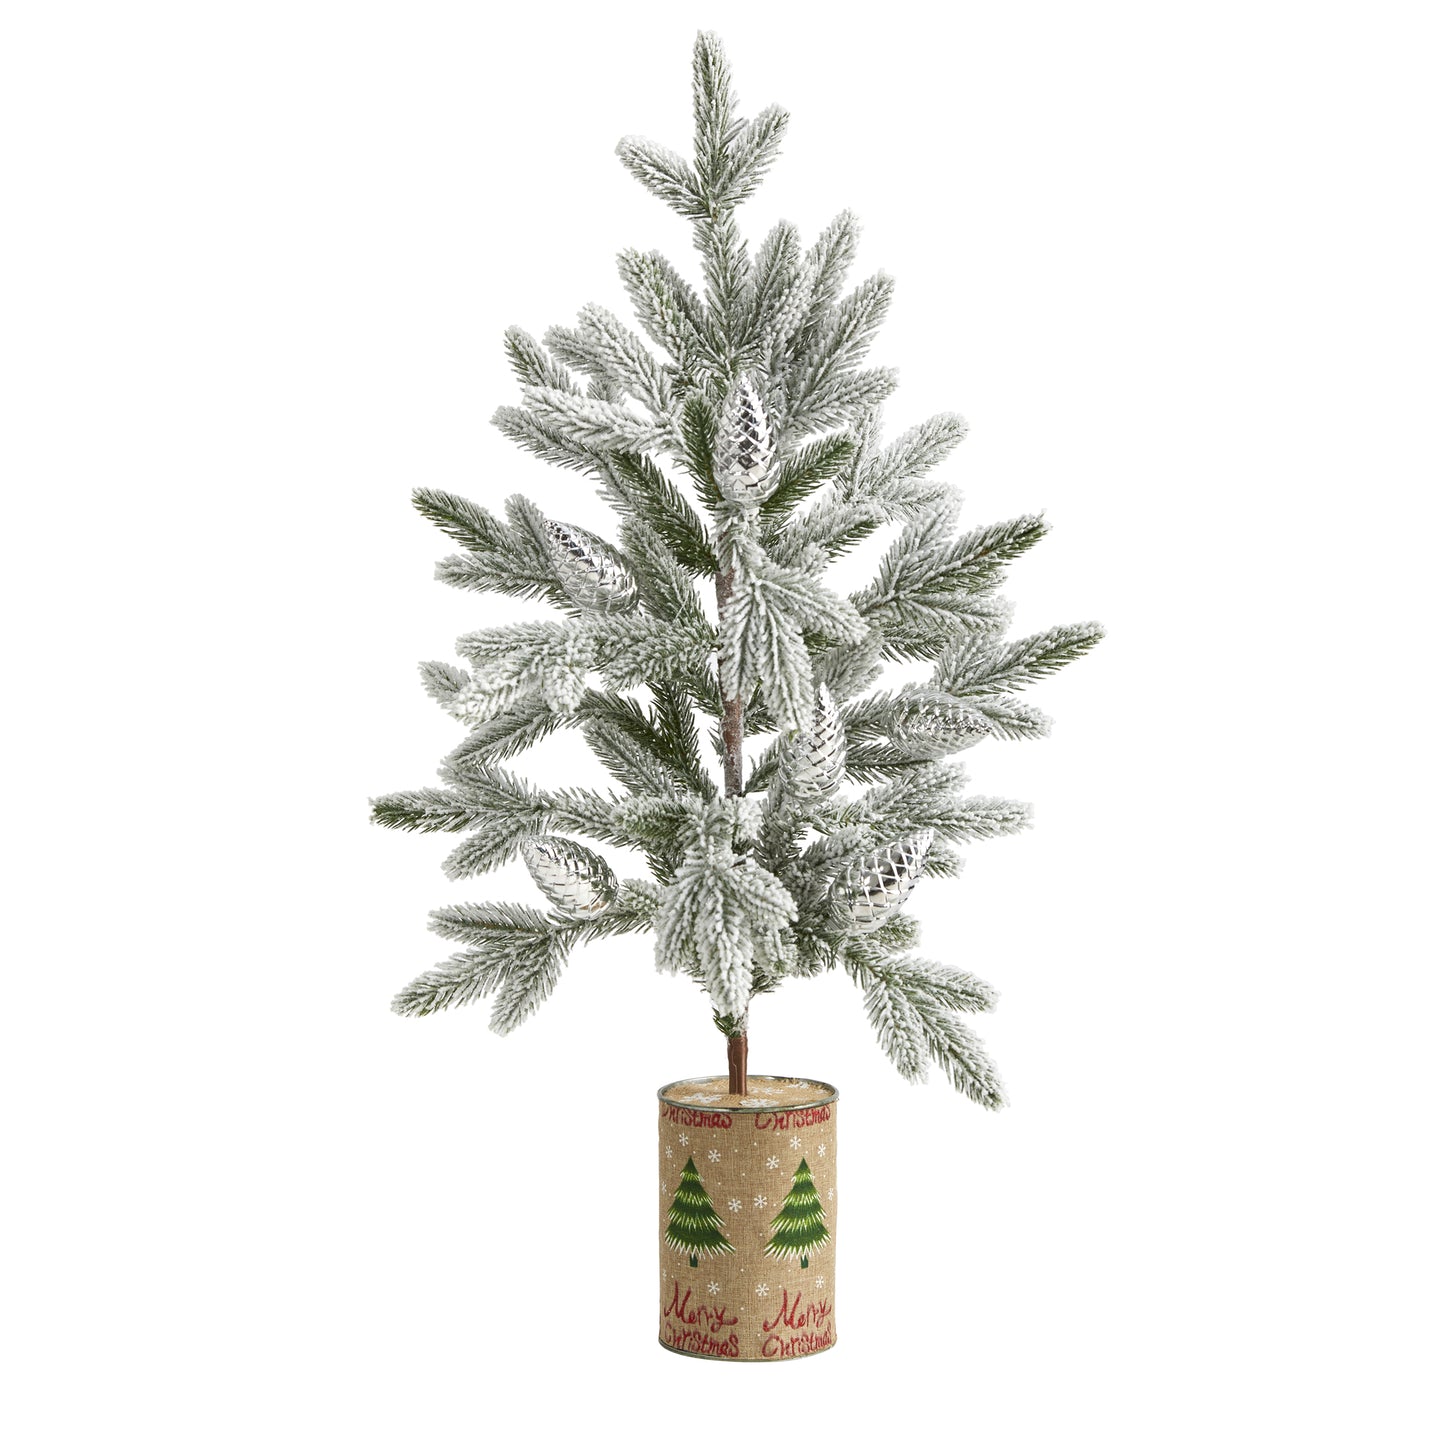 28” Flocked Christmas Artificial Tree In Decorative Planter